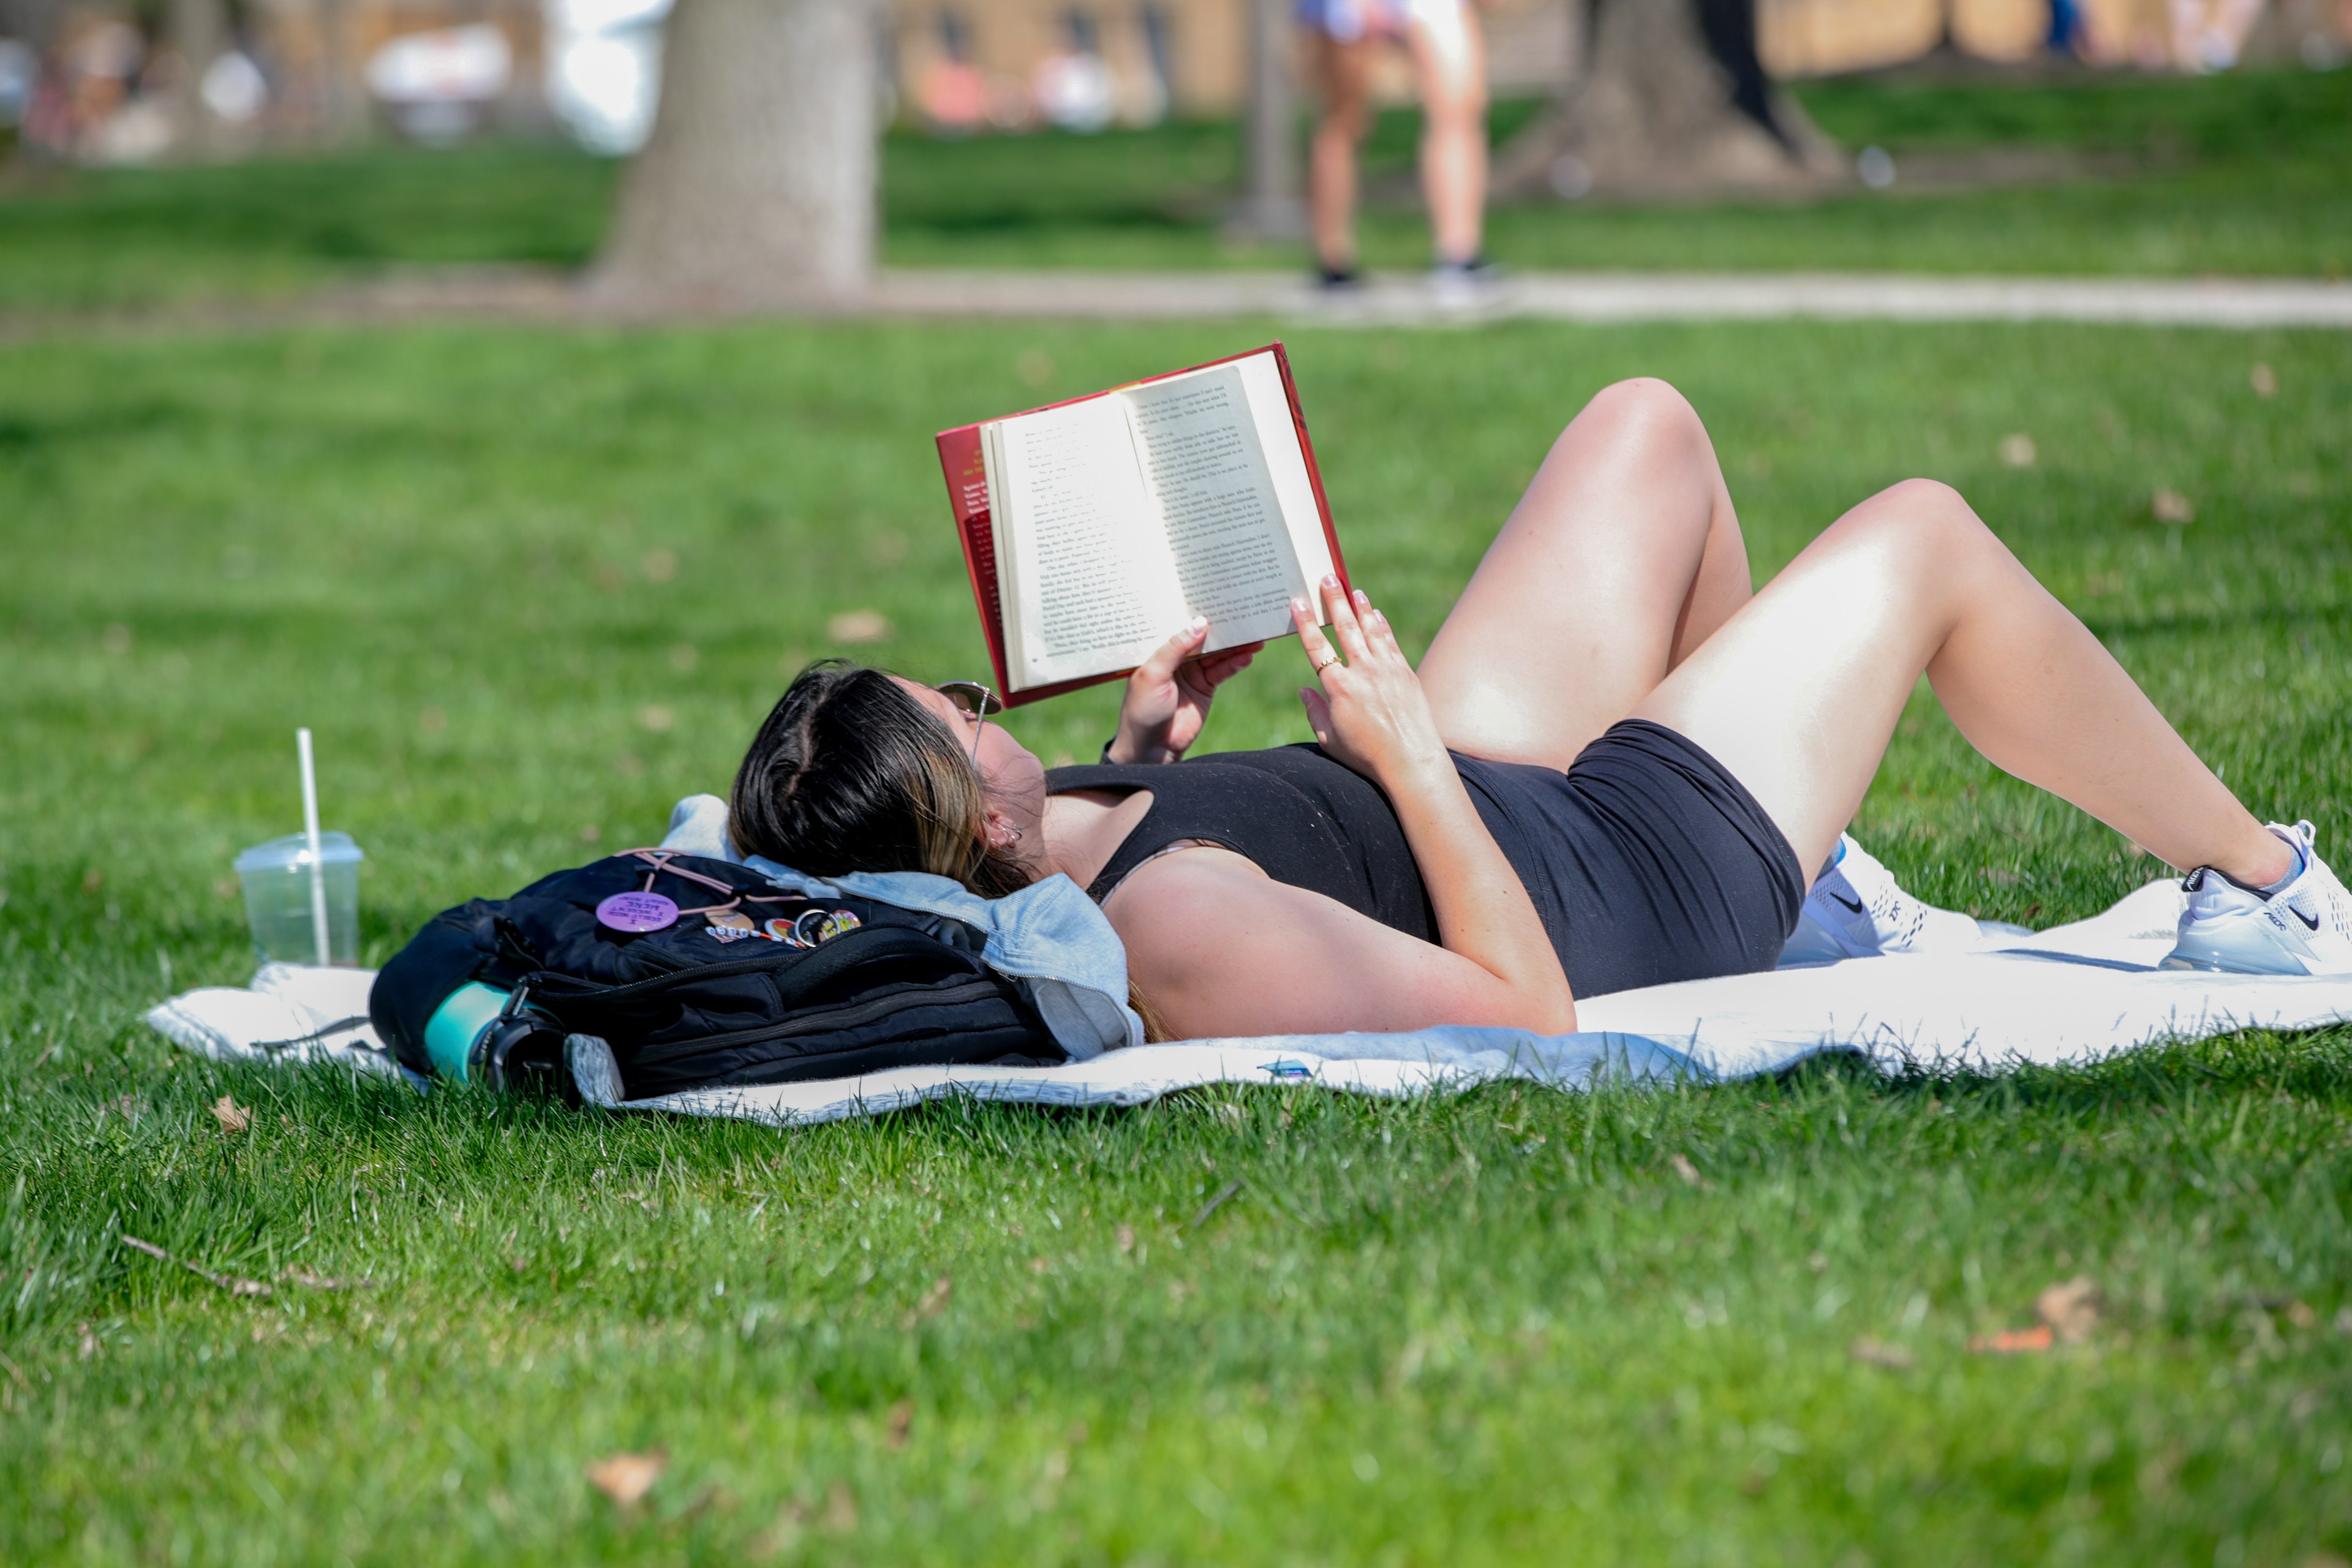 Student lays on her back reading a book on campus